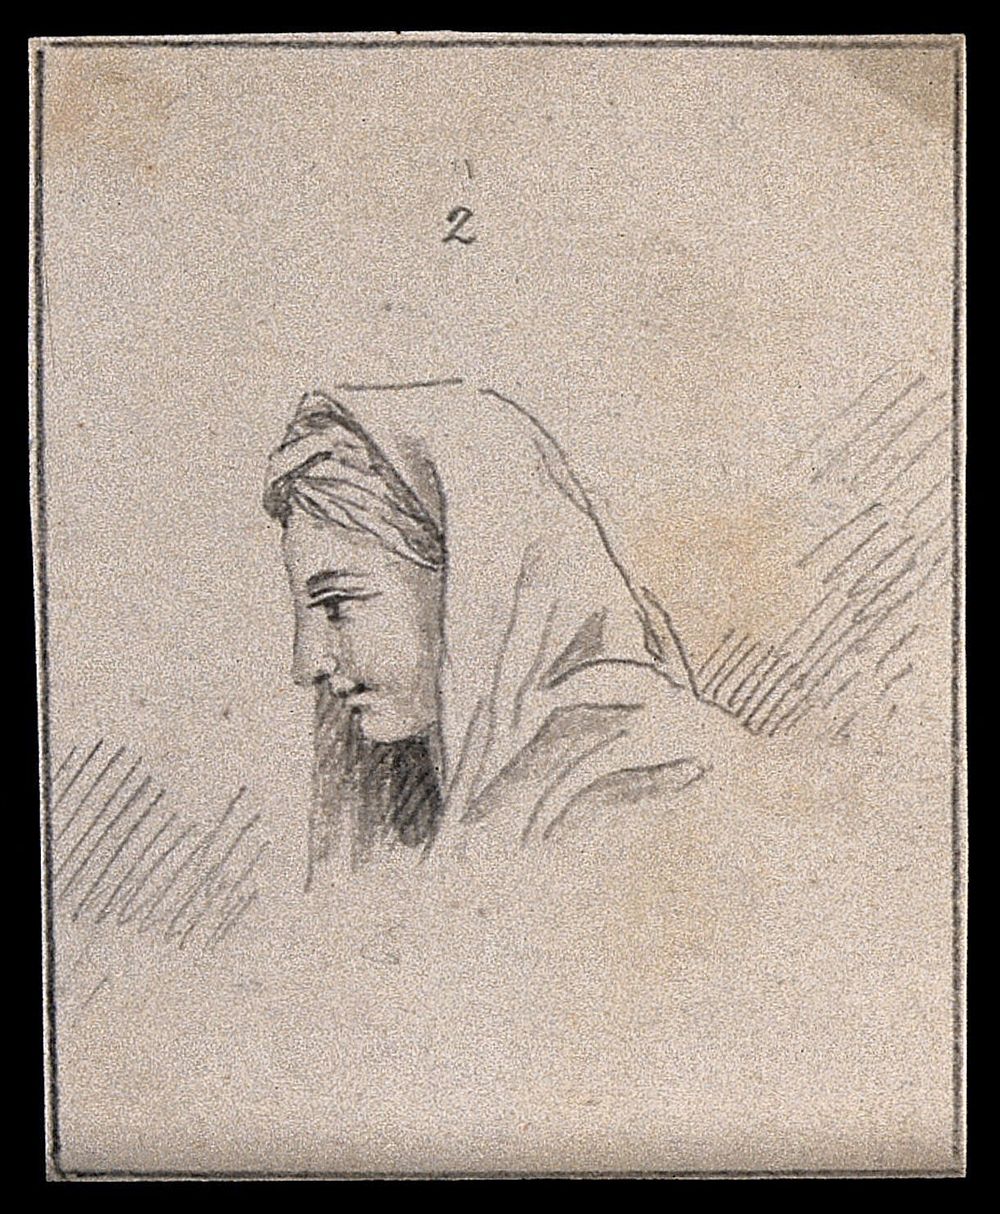 A woman lost in reflection: profile. Drawing, c. 1794, after N. Poussin.